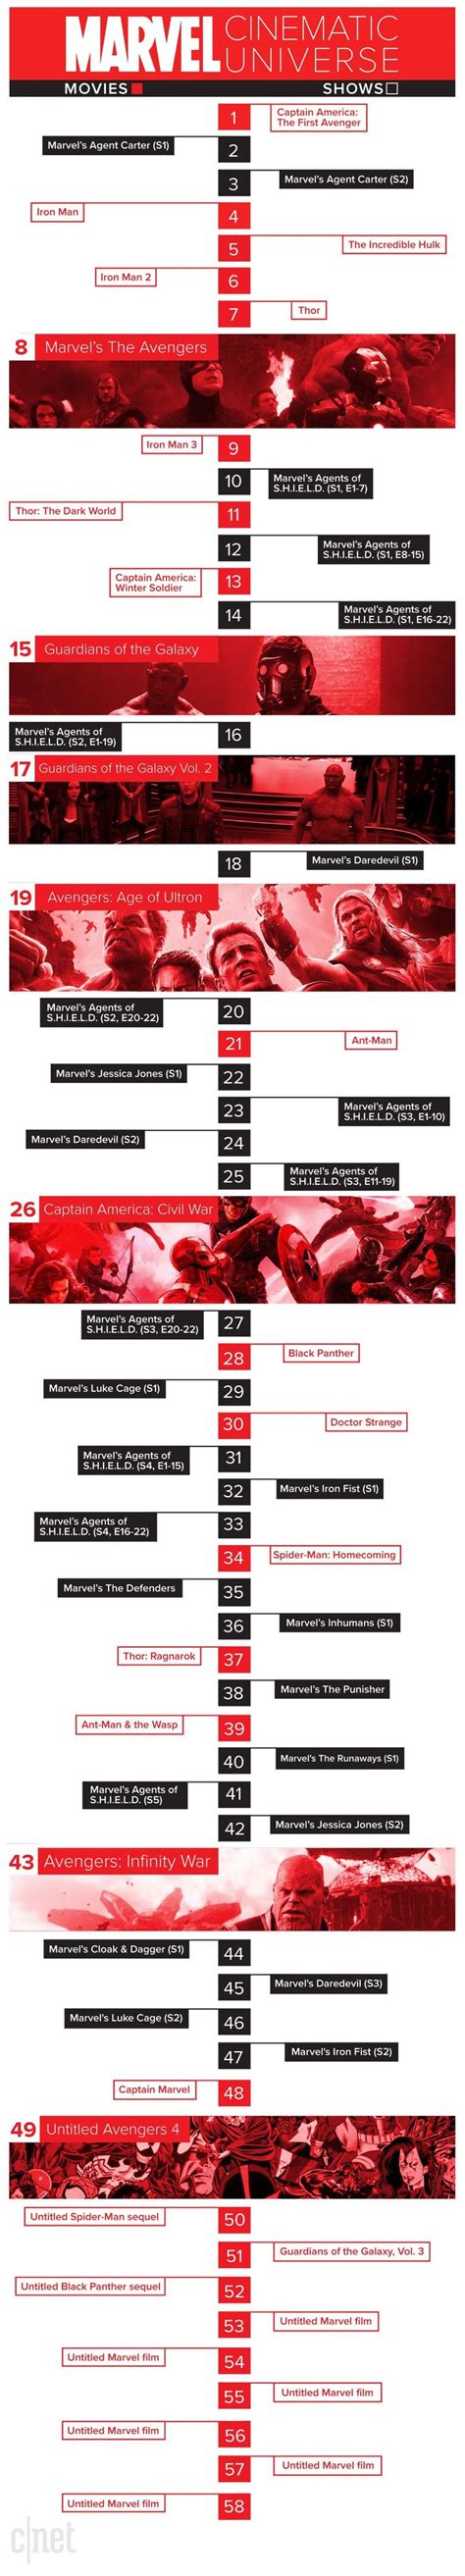 Mcu Chronological Viewing Order Including Every Movie And Tv Show